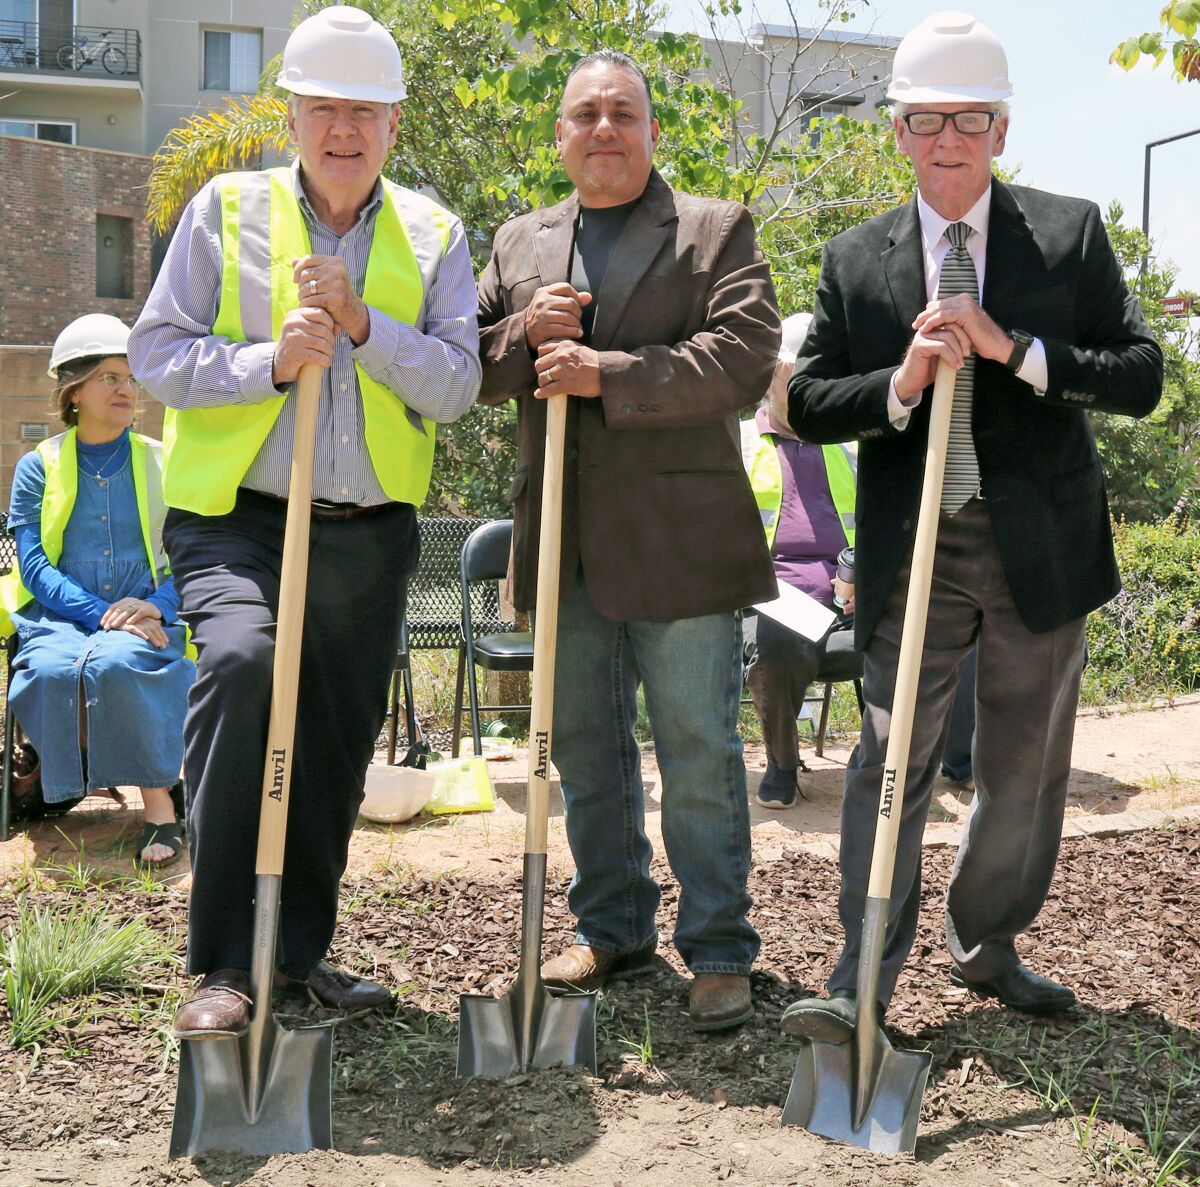 Ground was broken for the First United Methodist Church of Glendale’s renewal project to open up its entry this past May. Project chair Steve Cameron, from left, is pictured along with contractor Fernando Ayala and architect John Deenihan.